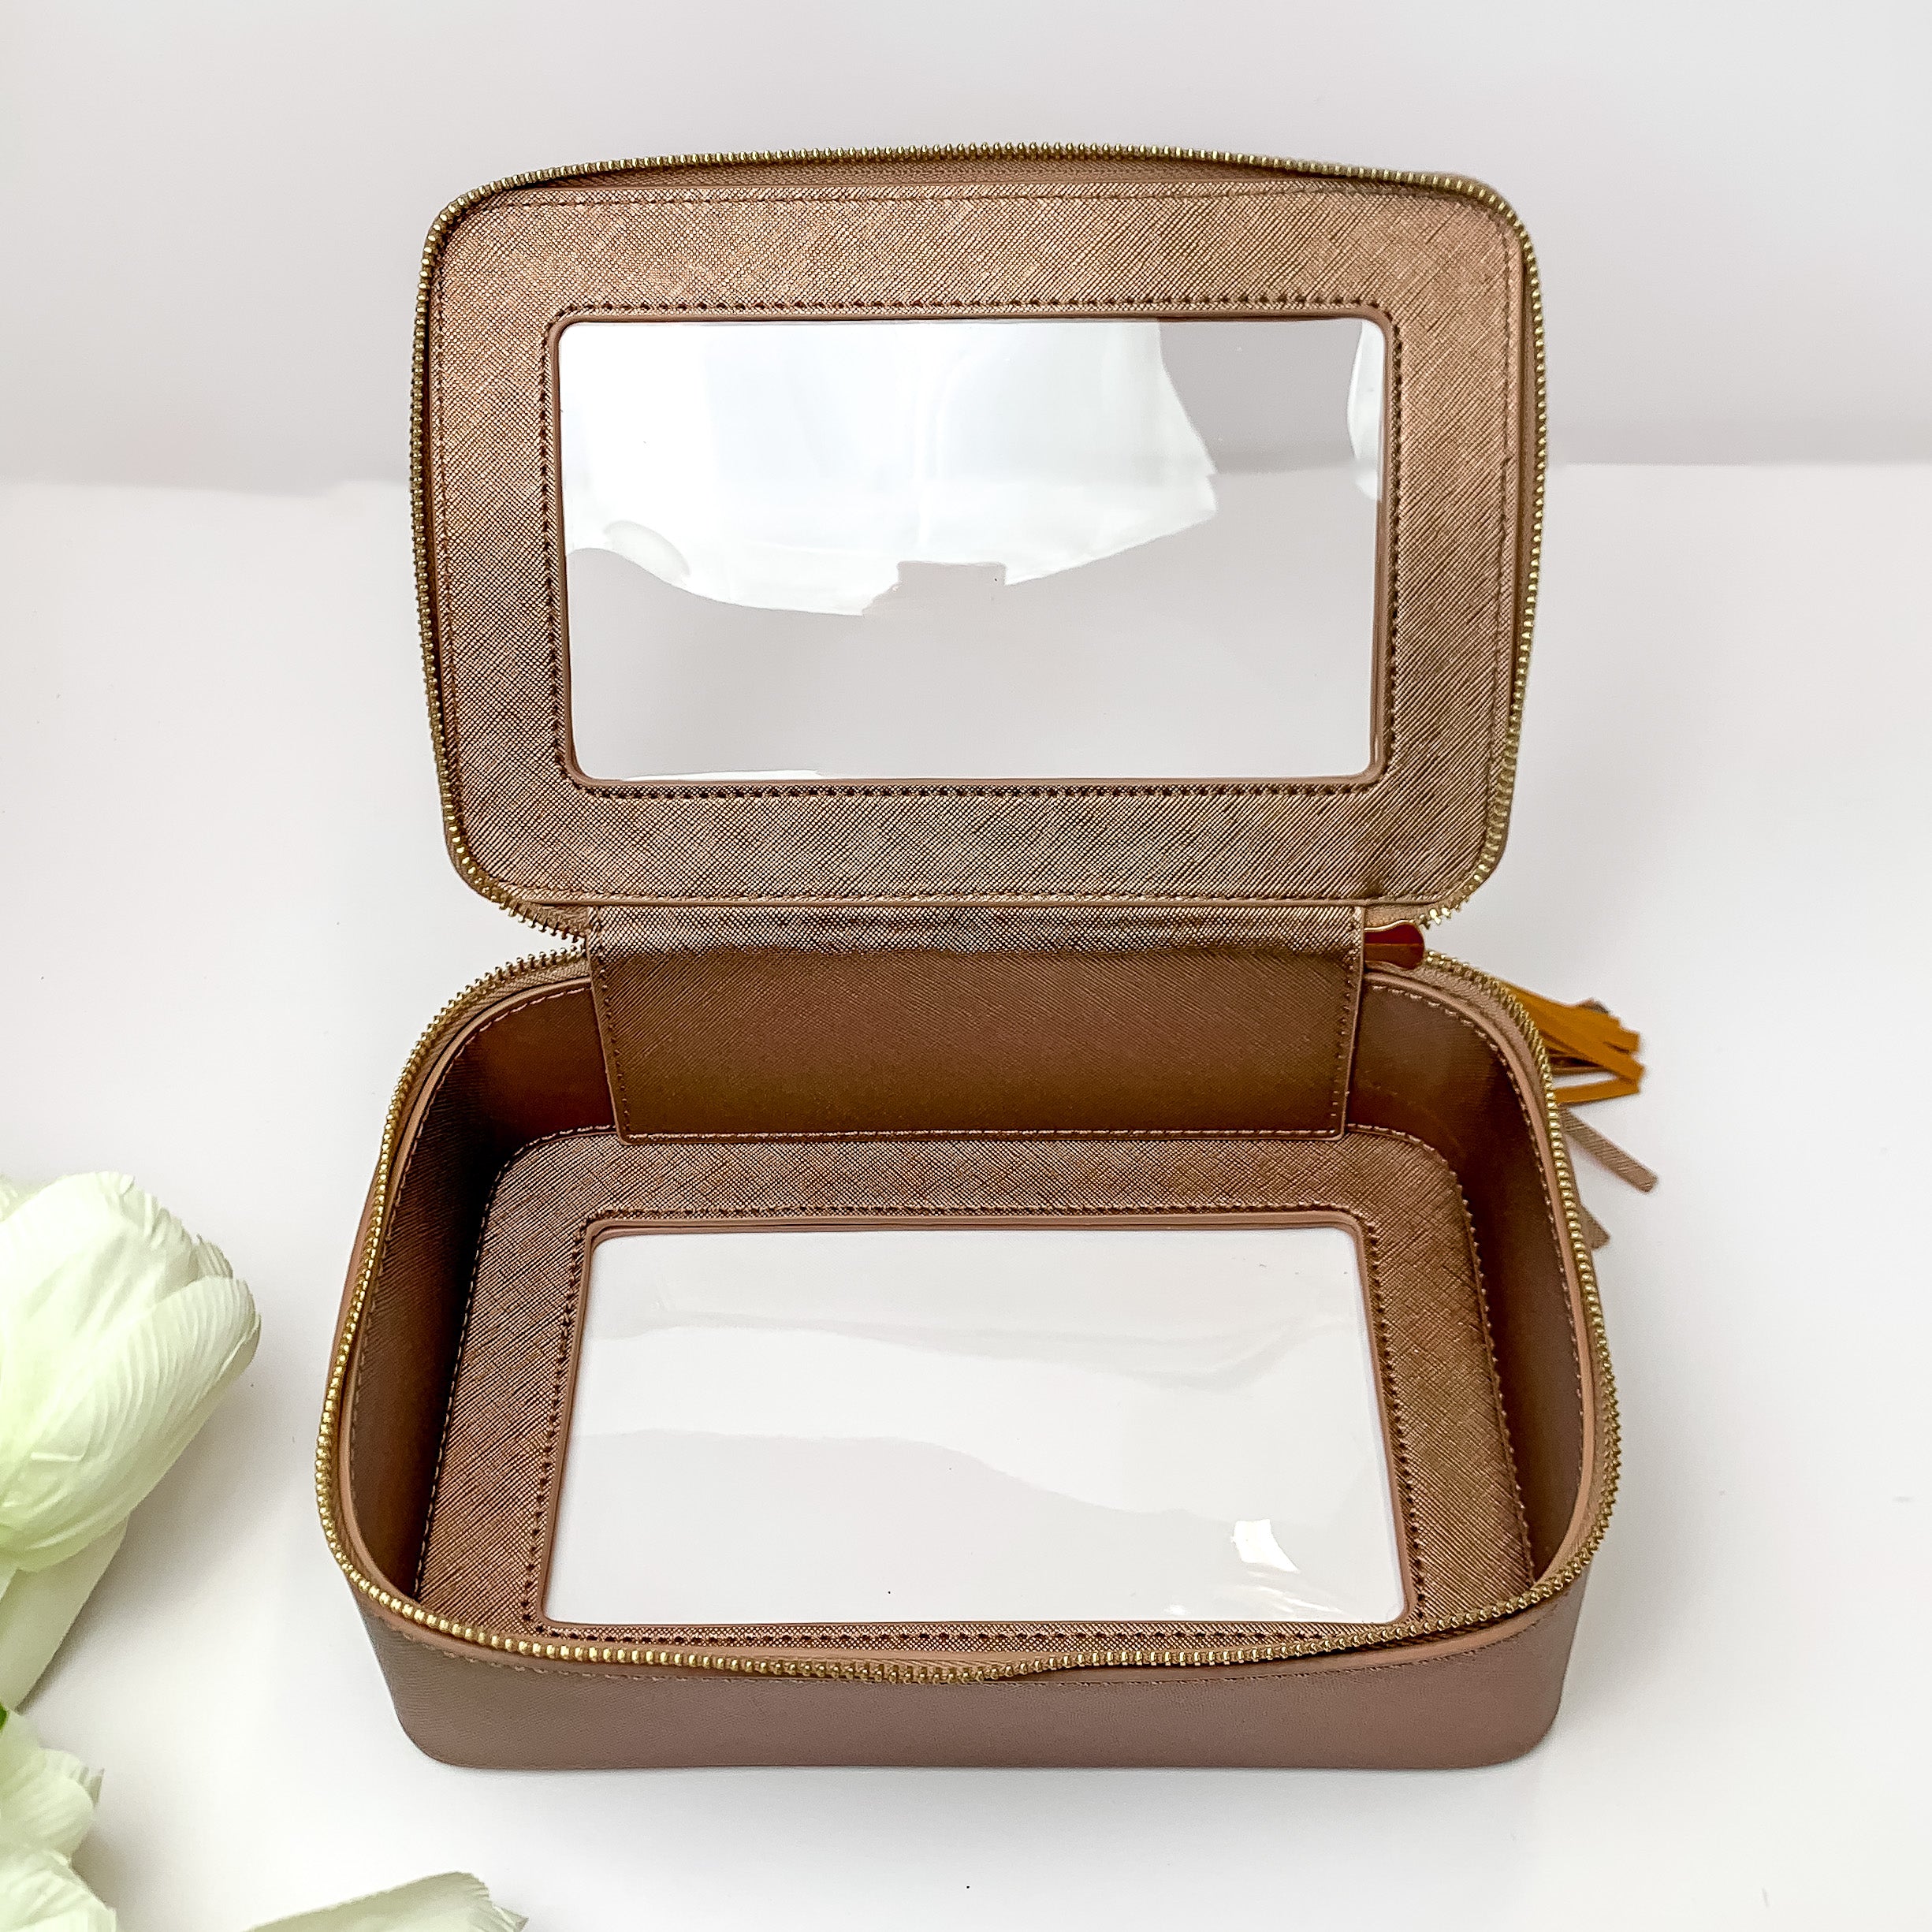 Hollis | Clear Toiletry Bag in Metallic Mocha - Giddy Up Glamour Boutique